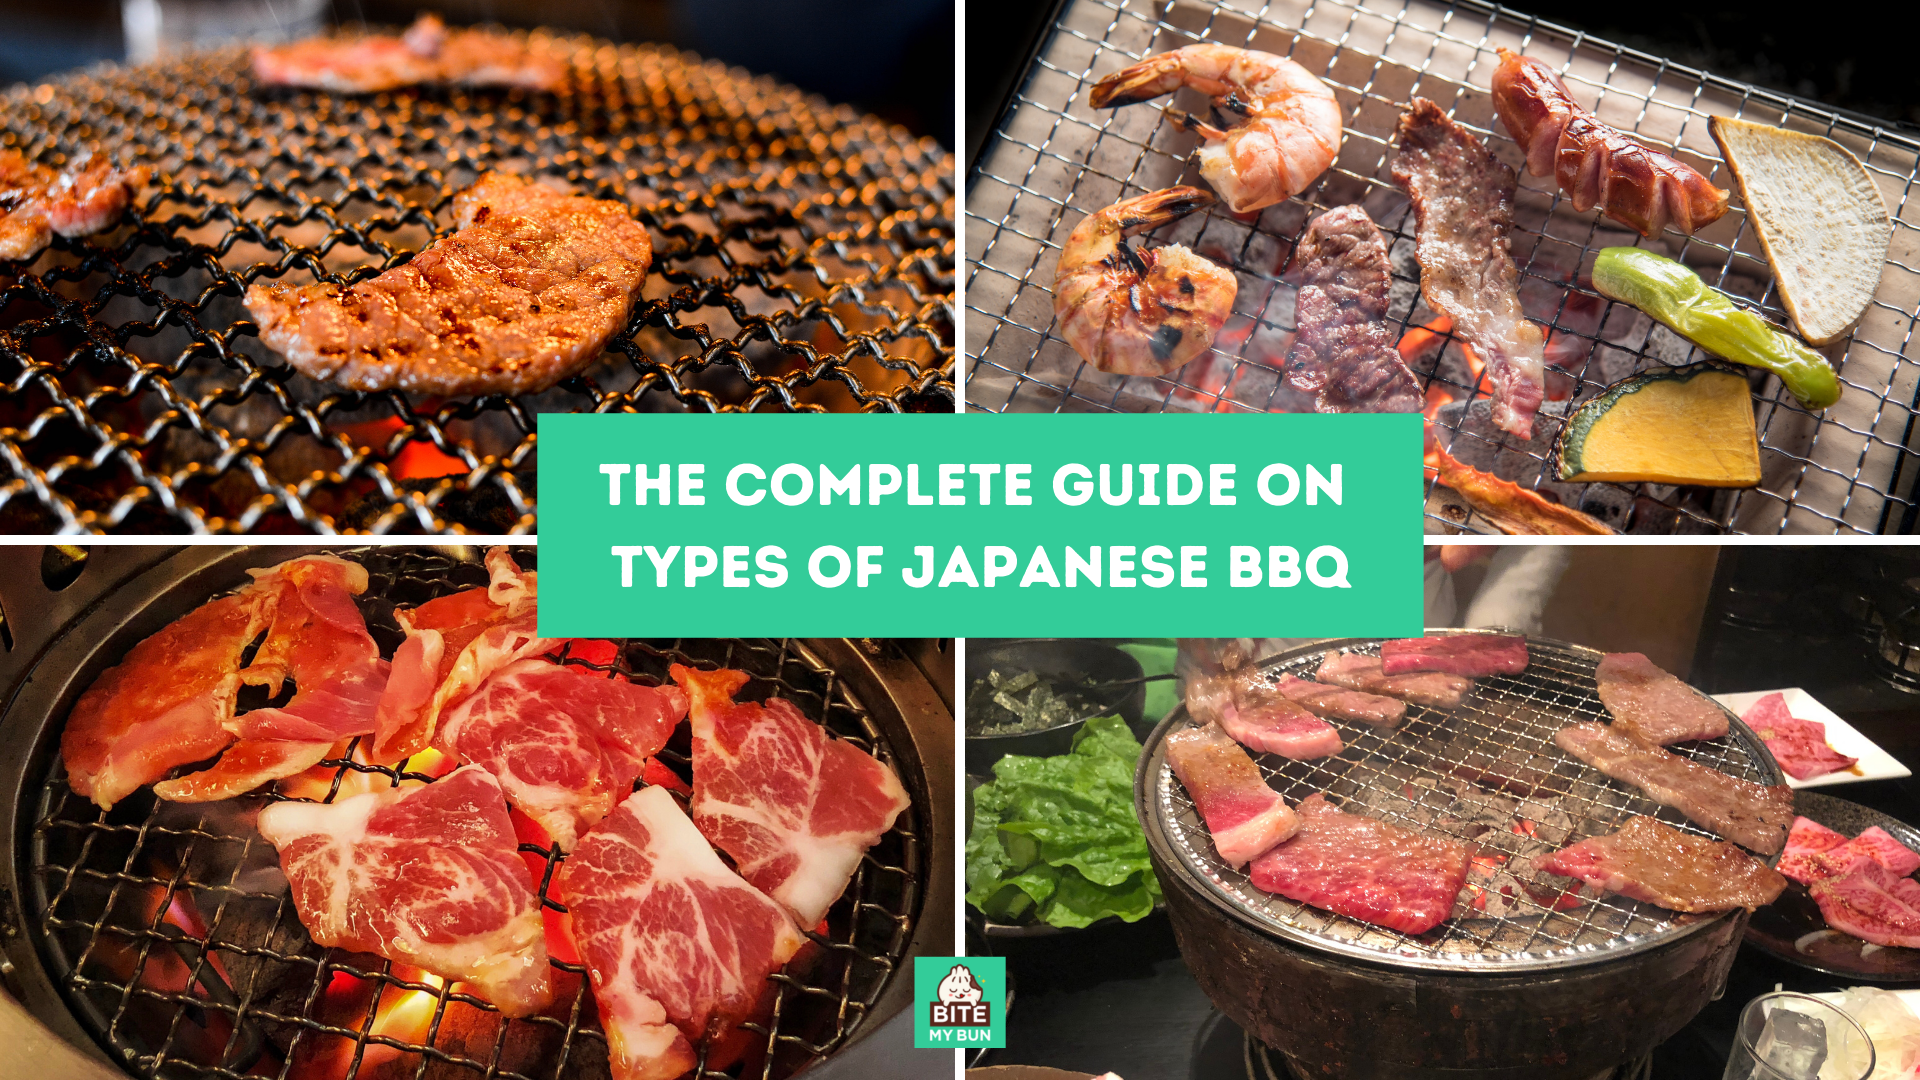 The complete guide on types of Japanese BBQ